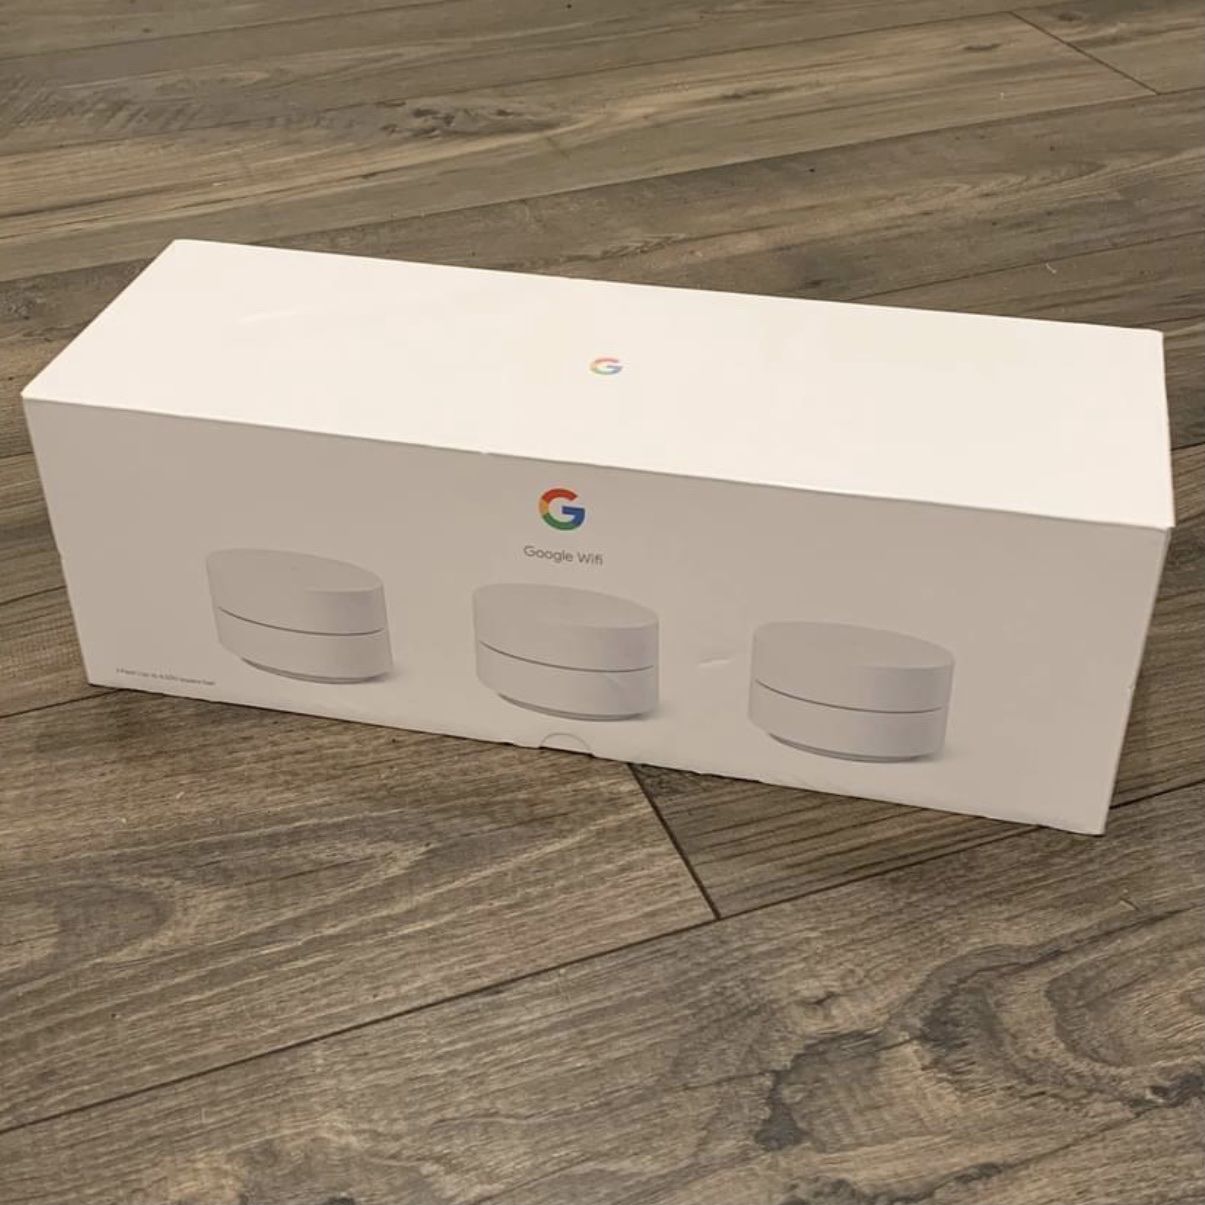 NEW Google Wifi Mesh Router 3 Pack. Satellite access point, internet, like eero velop orbi